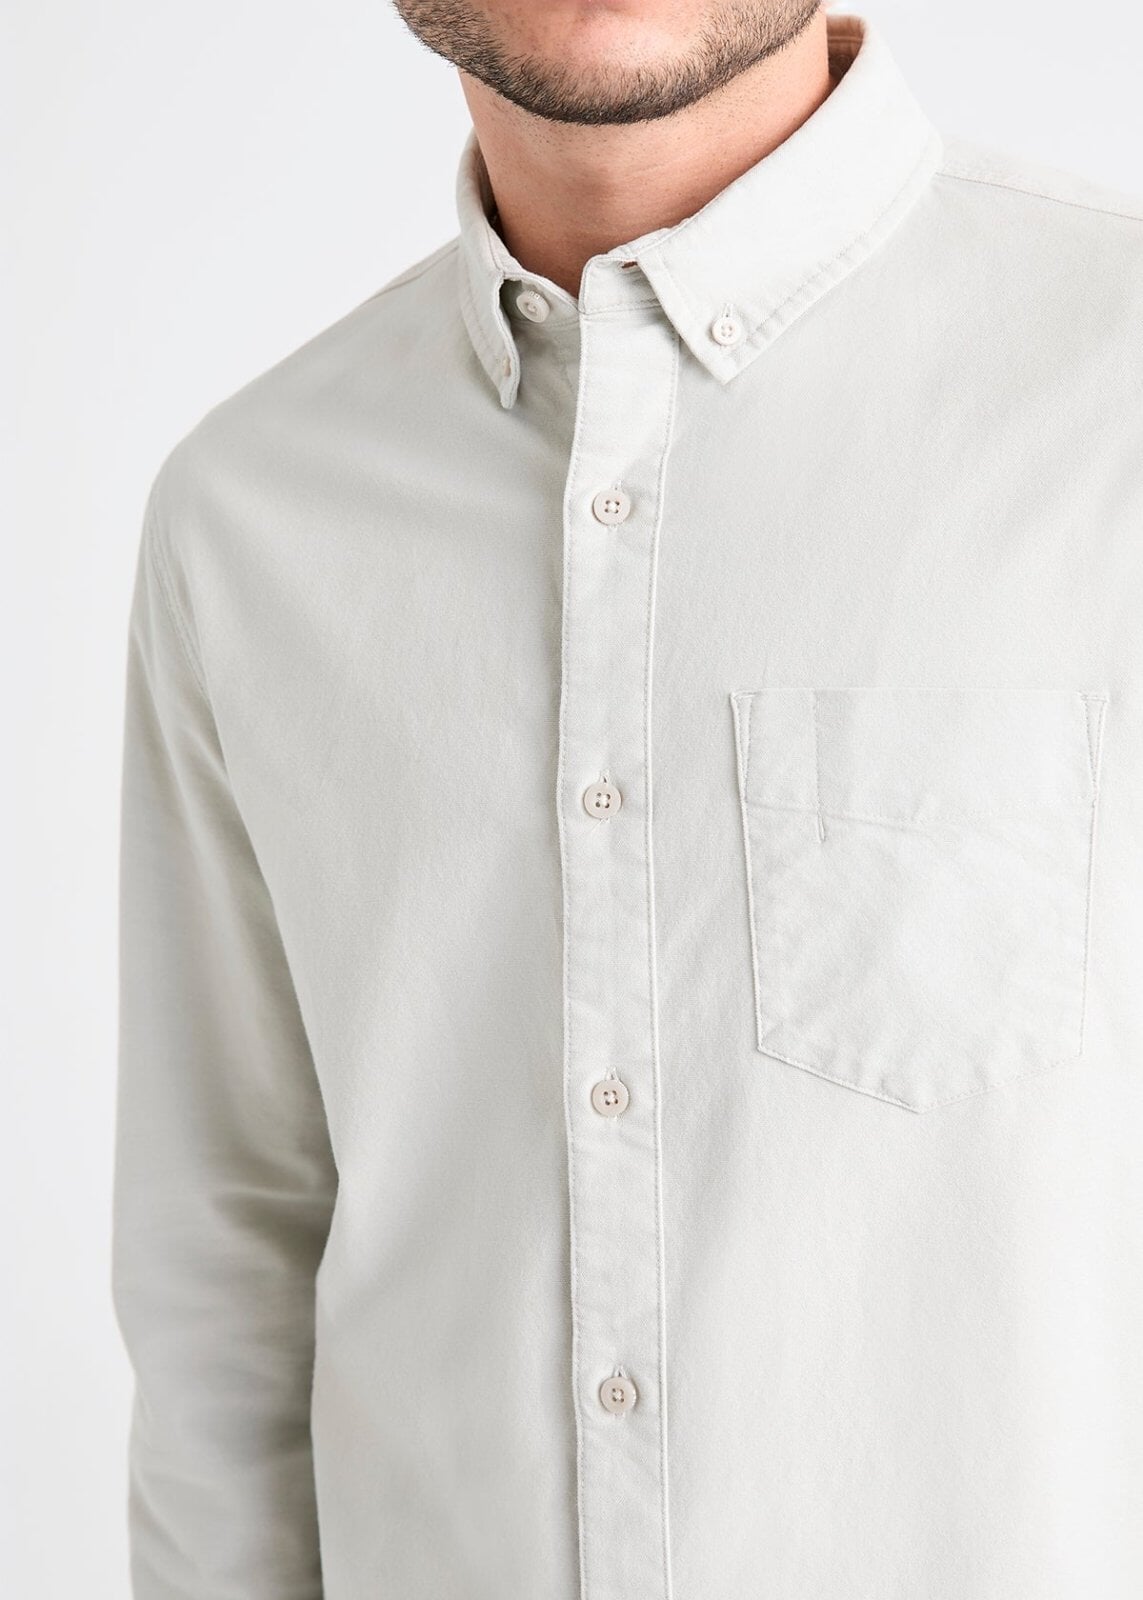 mens off-white stretch button down shirt buttons and chest pocket detail